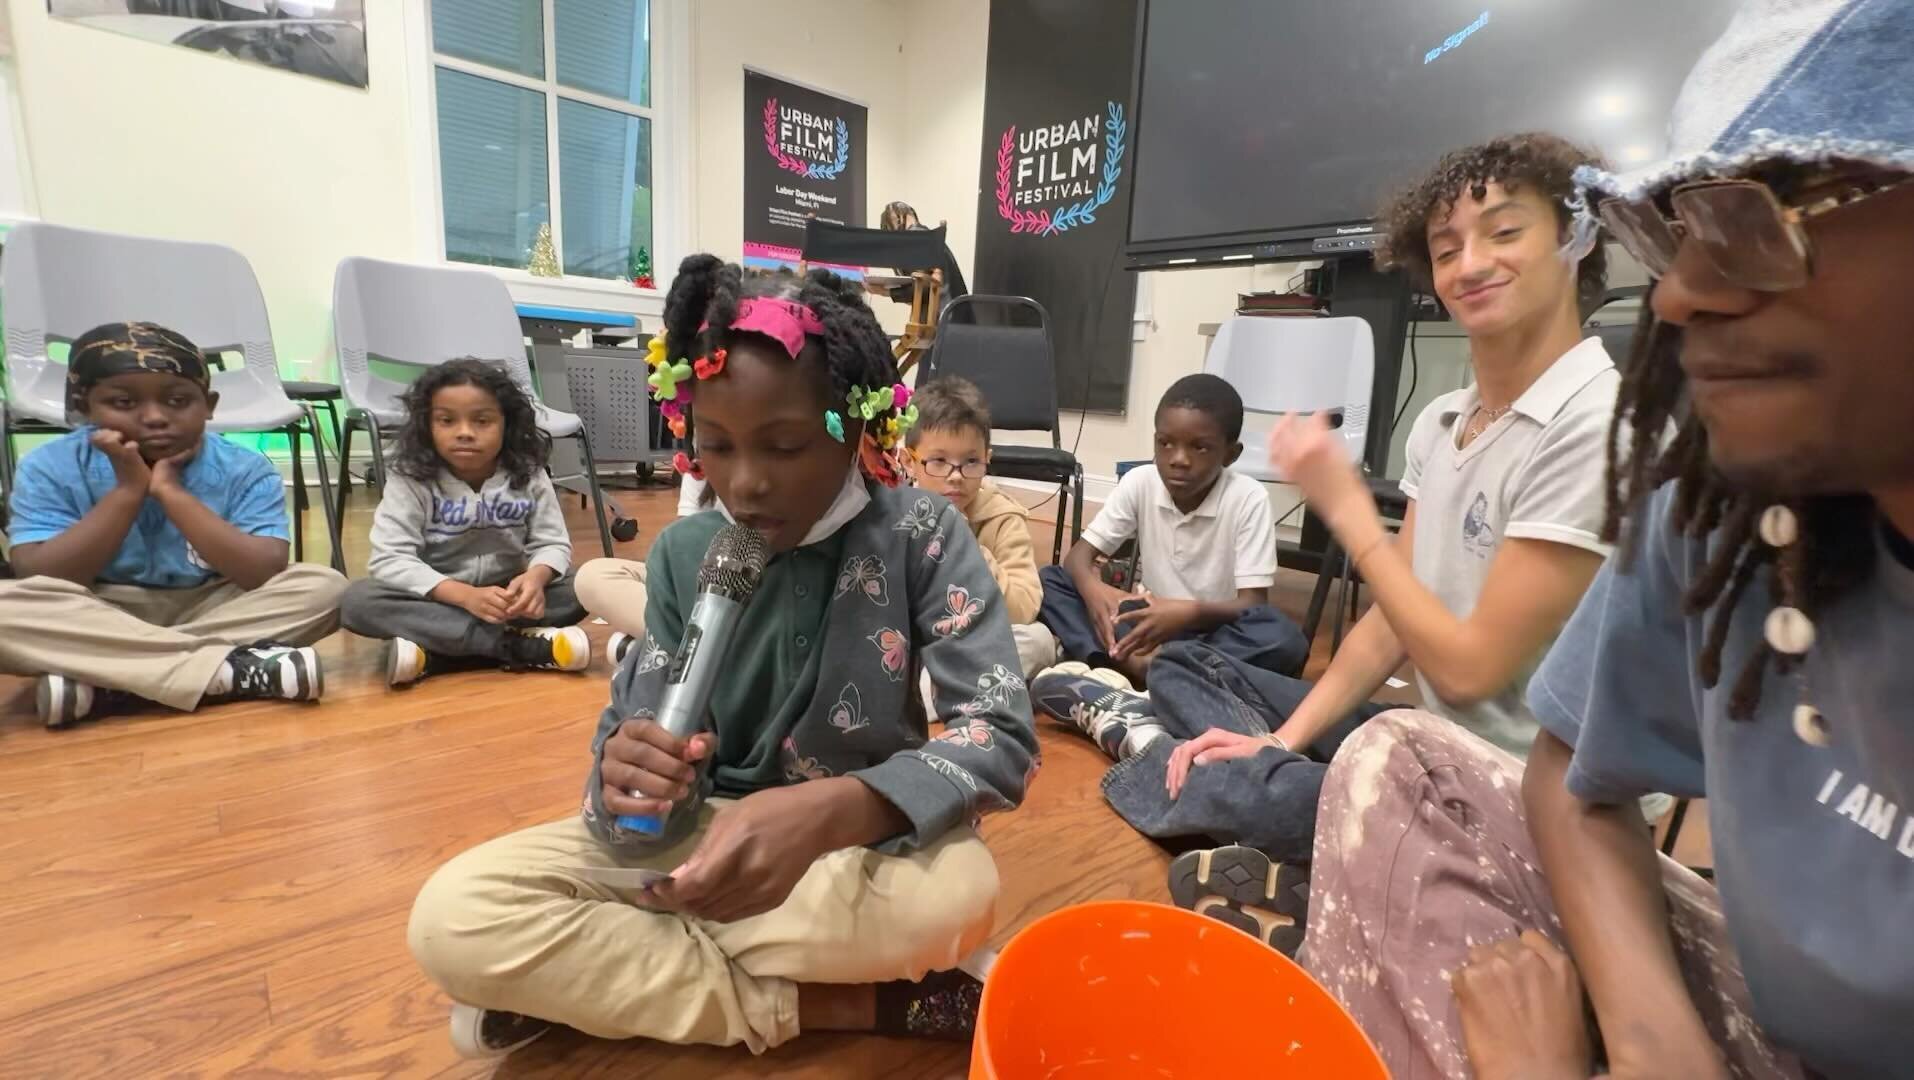 I AM MORE THAN ENOUGH

An affirmation card pulled &amp; read to me by one of the babies at the youth suicide prevention Another Awesome Day Event in Miami presented by @y3kquest. I was blessed to offer soundbaths and affirmation workshops for 4 group